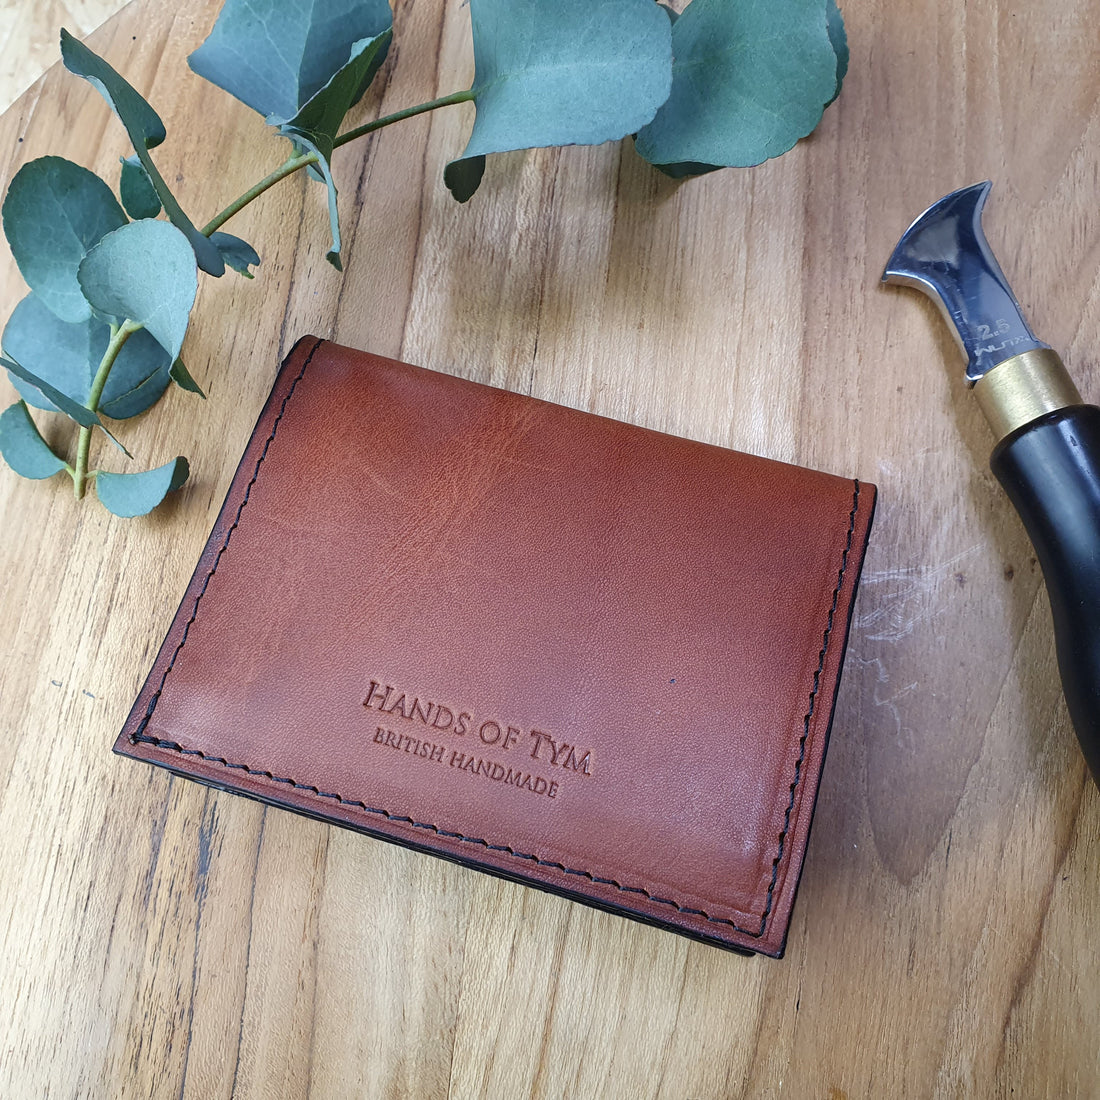 What are the benefits of learning leather craft?